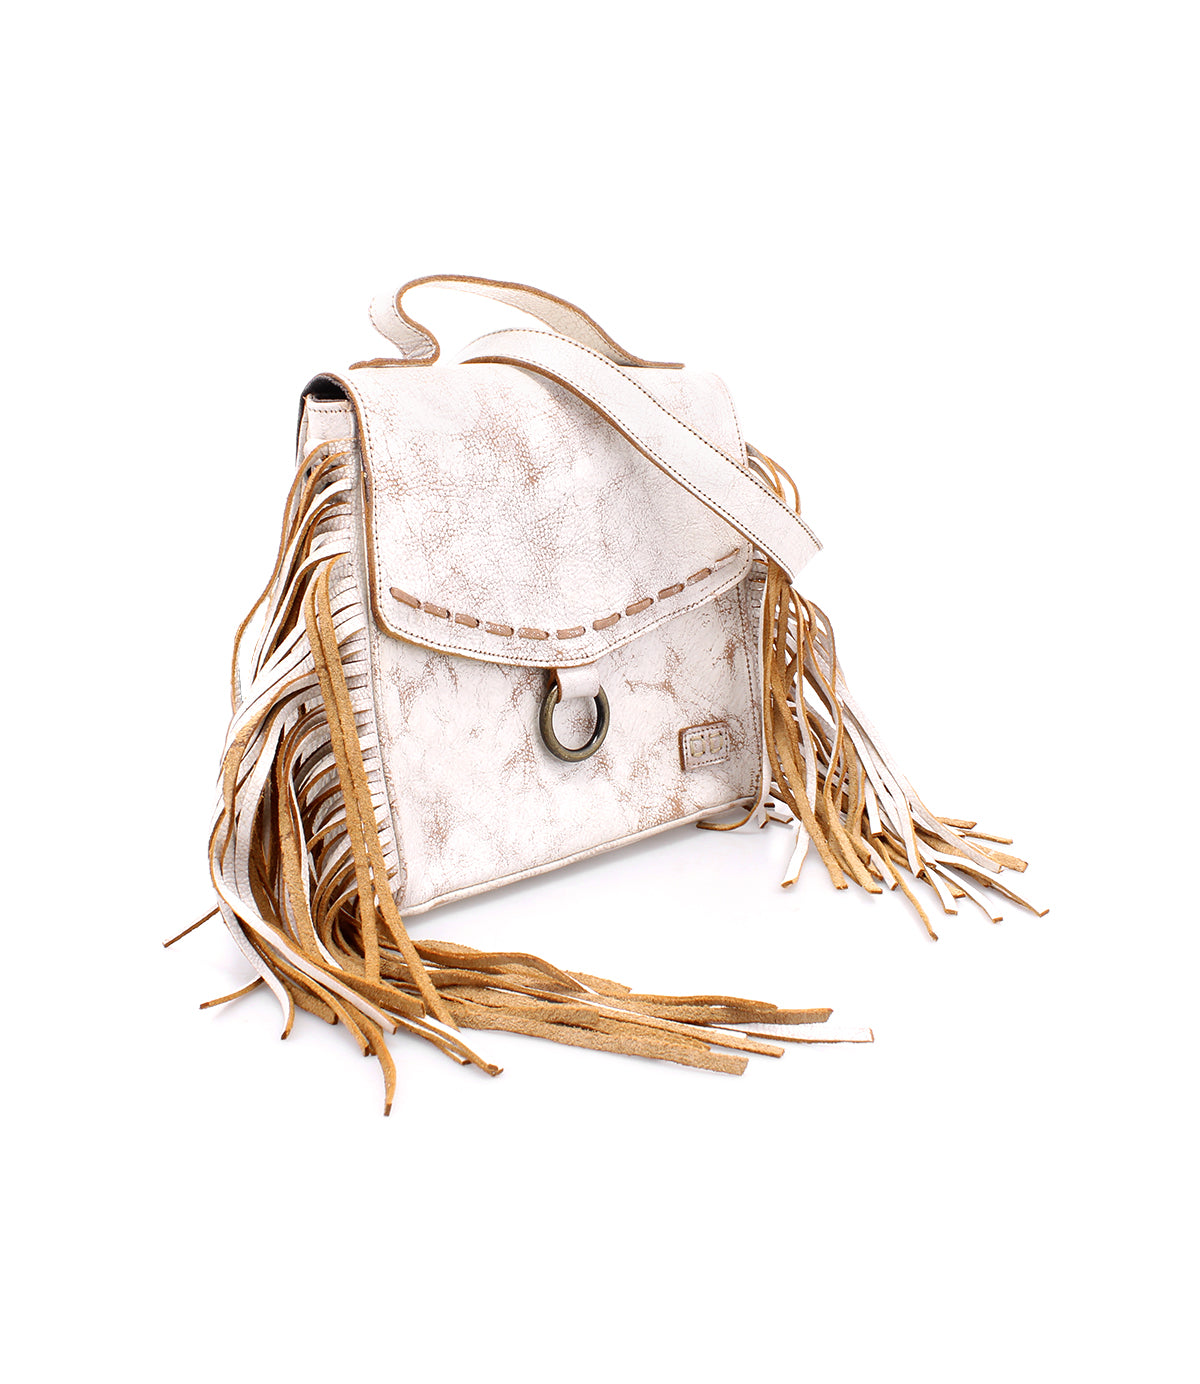 White Tote Bags and Tassels